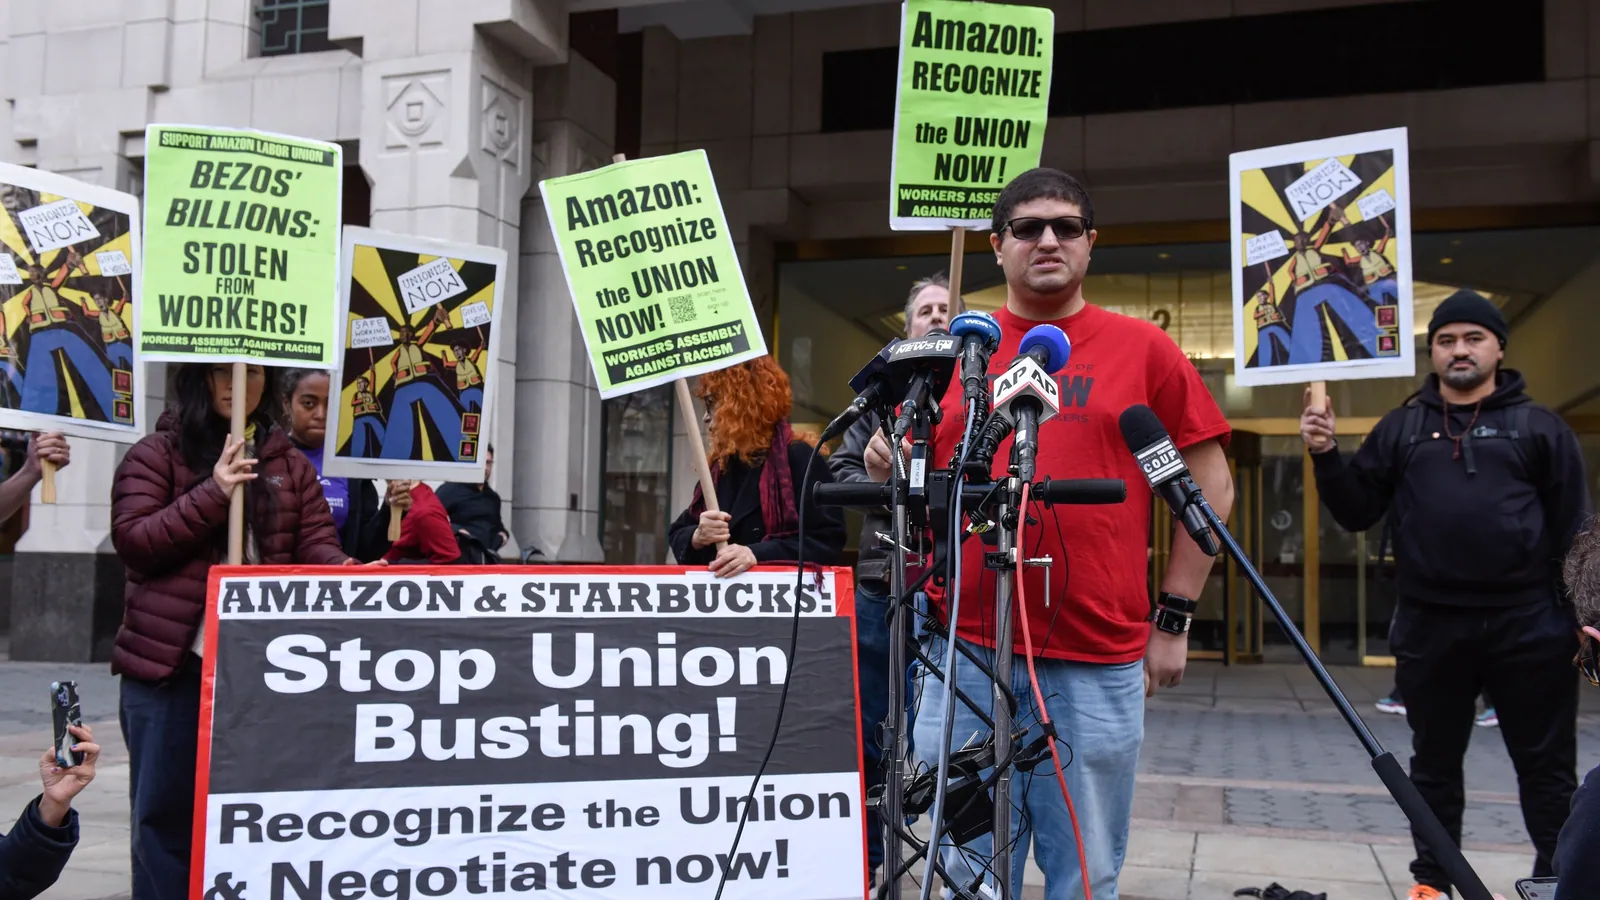 Amazon workers in New York warehouse vote to form a union, a first in US